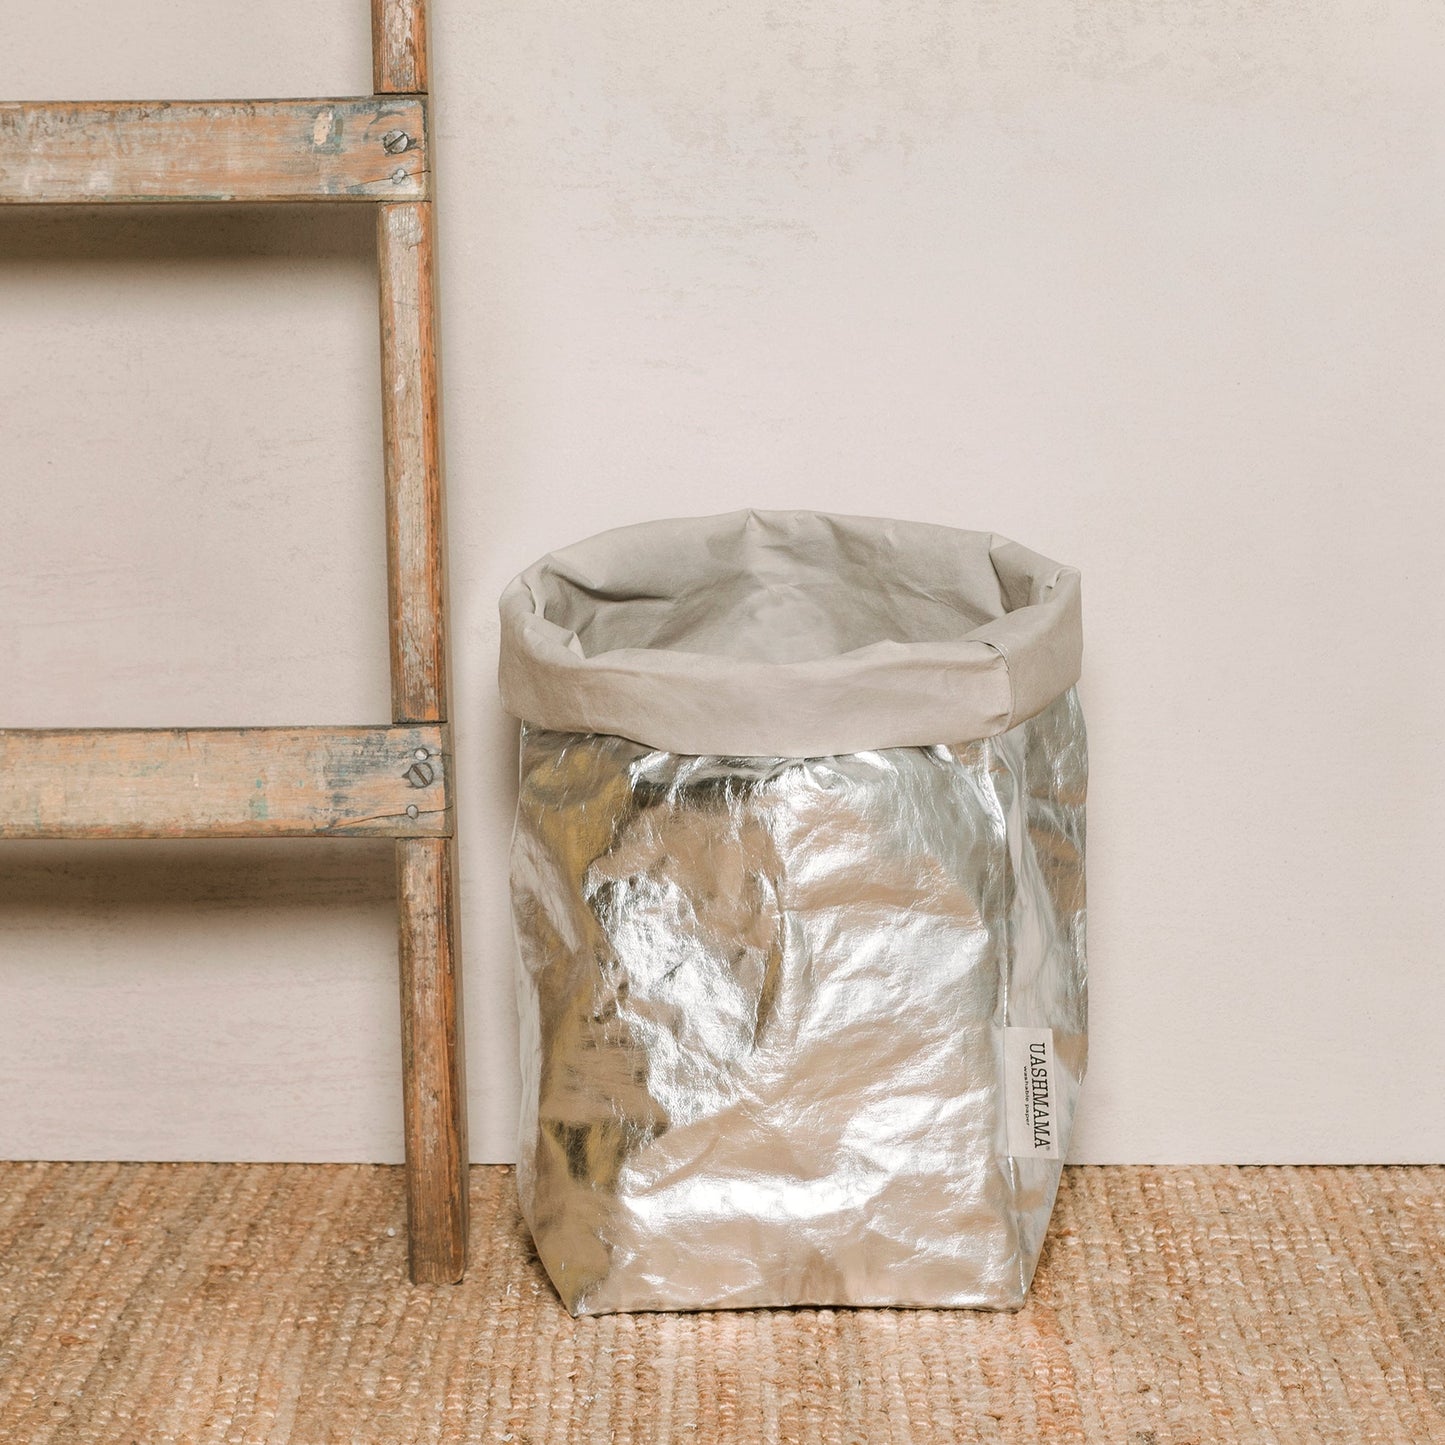 A washable paper bag is shown. The bag is rolled down at the top and features a UASHMAMA logo label on the bottom left corner. The bag pictured is the extra large size in metallic platinum. Next to the paper bag is a wooden ladder.